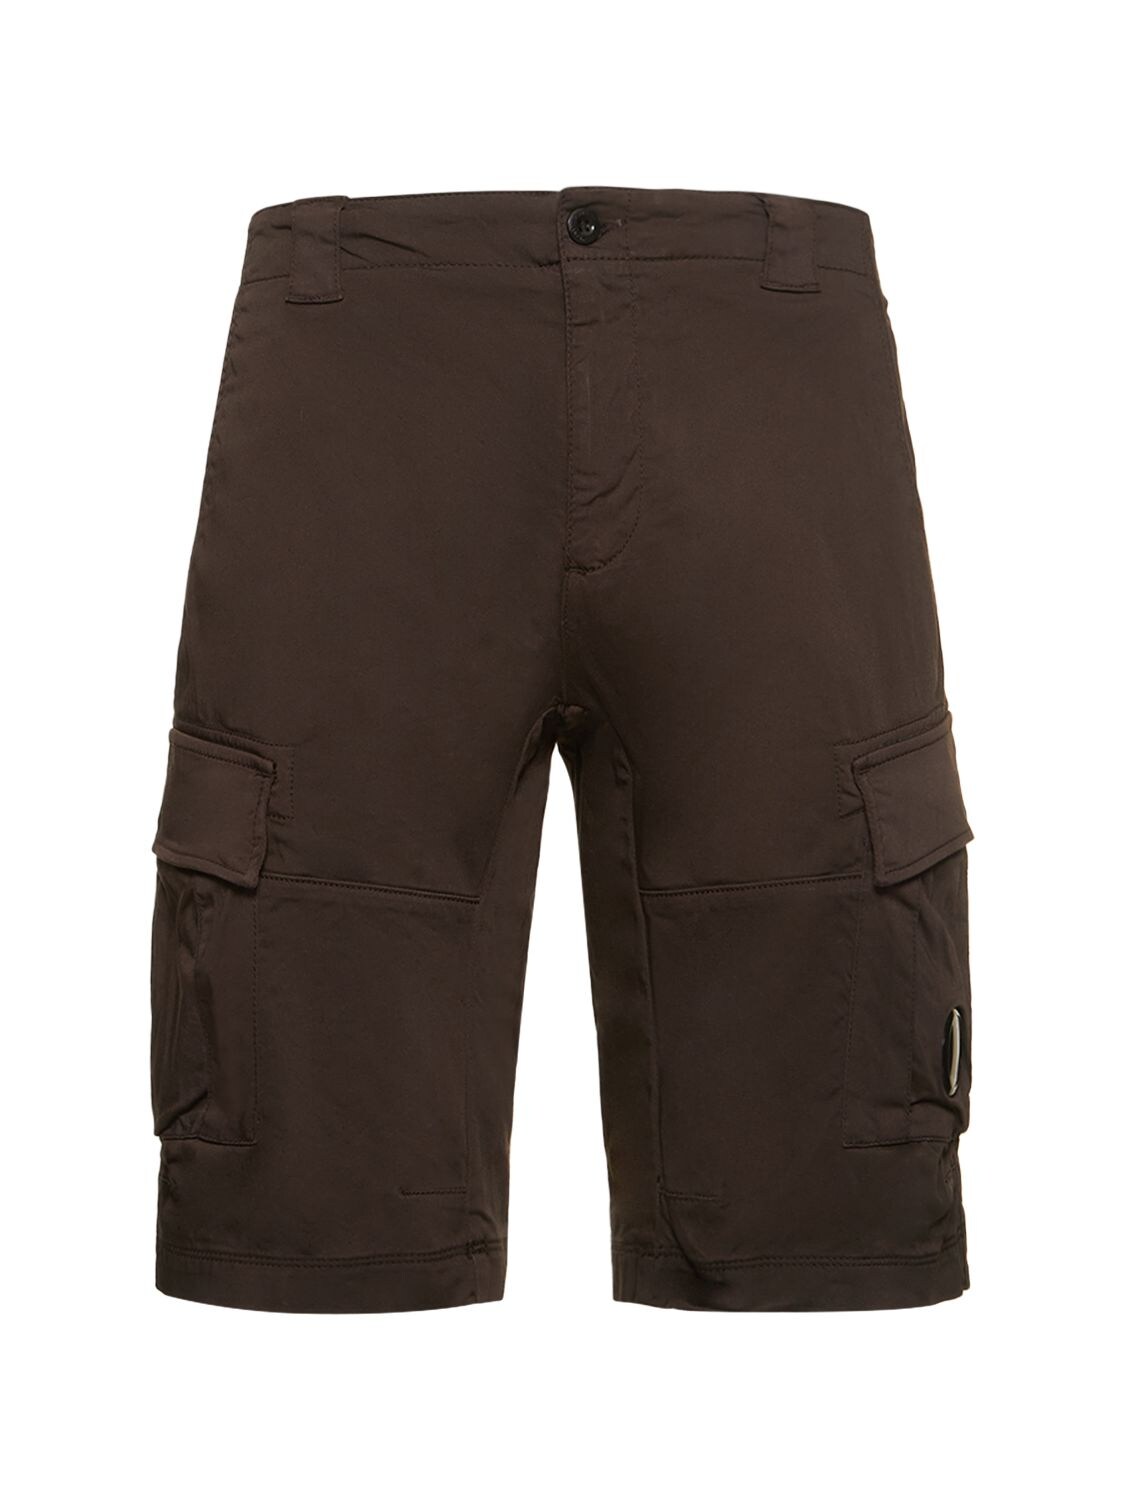 C.p. Company Cotton Cargo Shorts In Chocolate